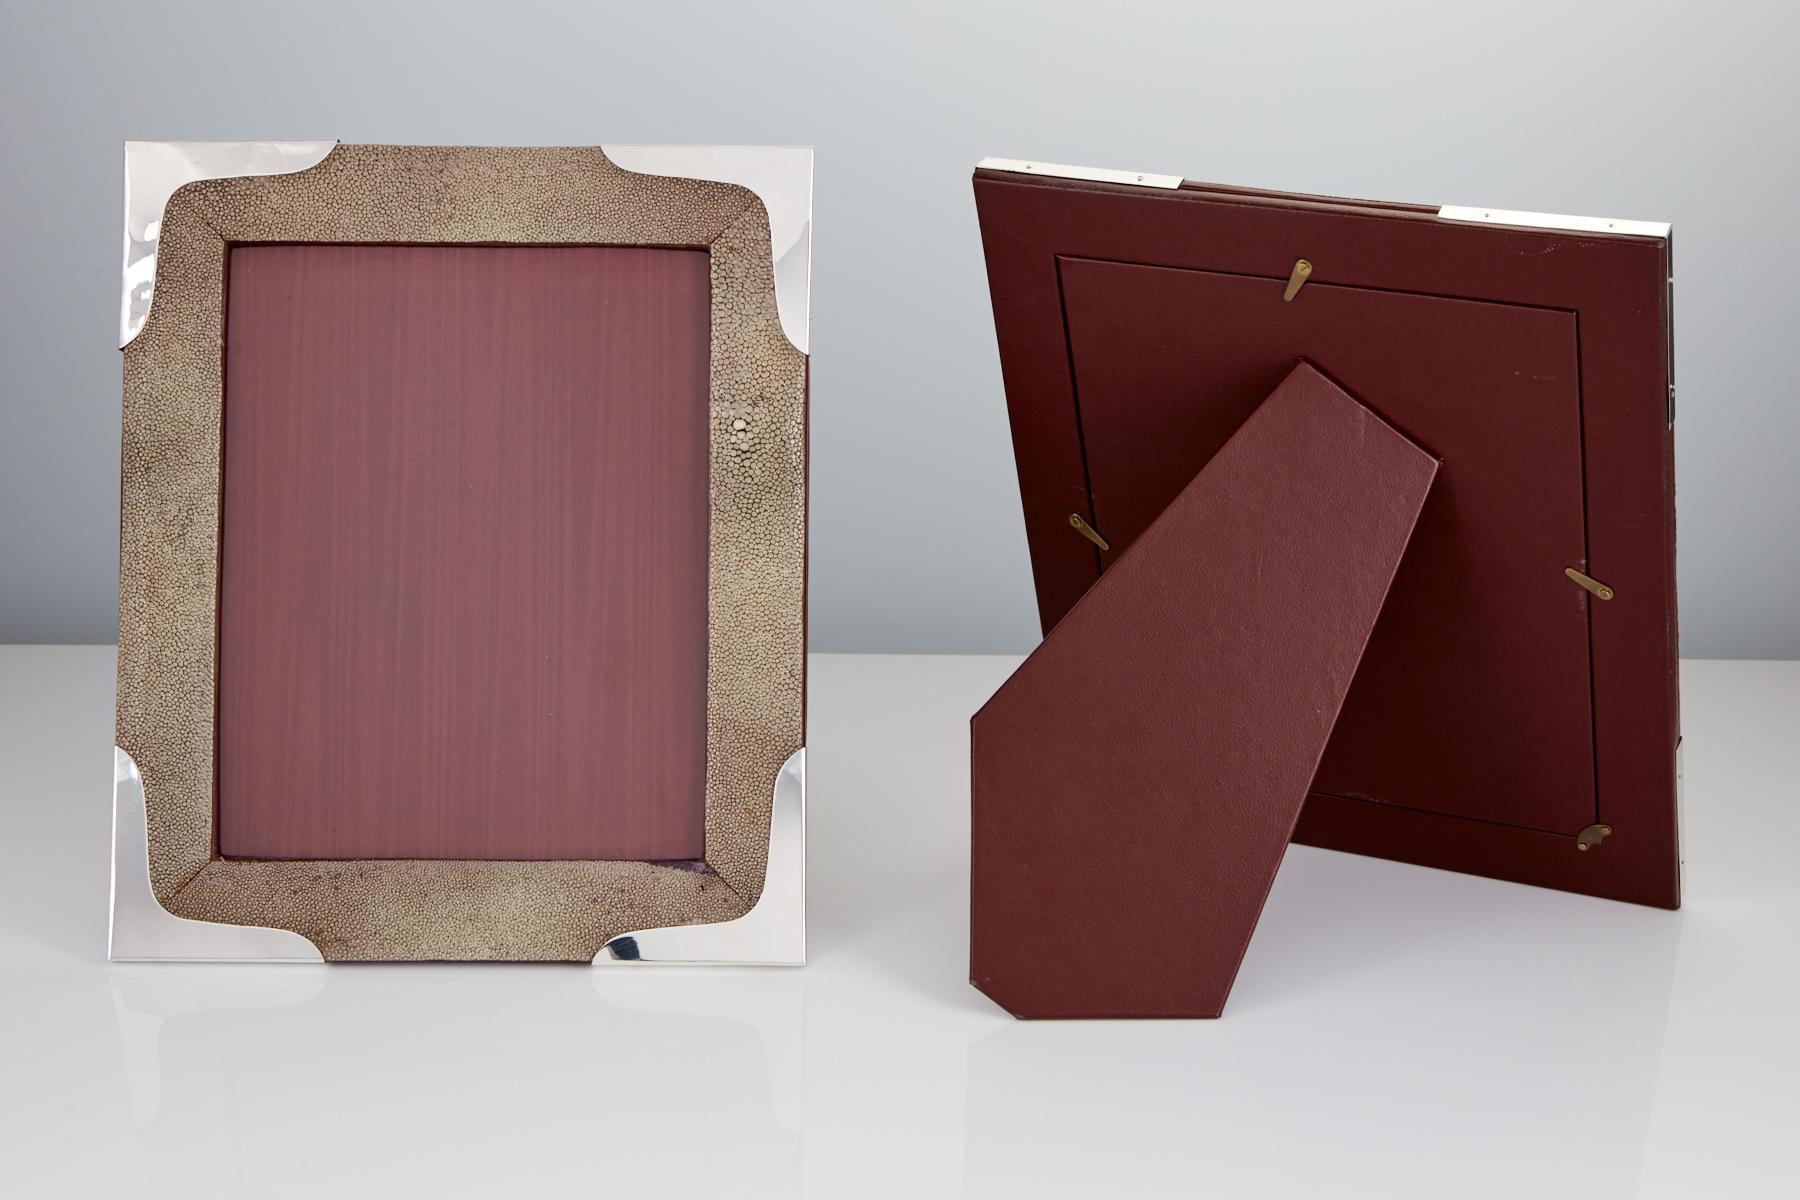 English Pair of Large Mid-20th Century Shagreen Photo Frames, circa 1960 For Sale